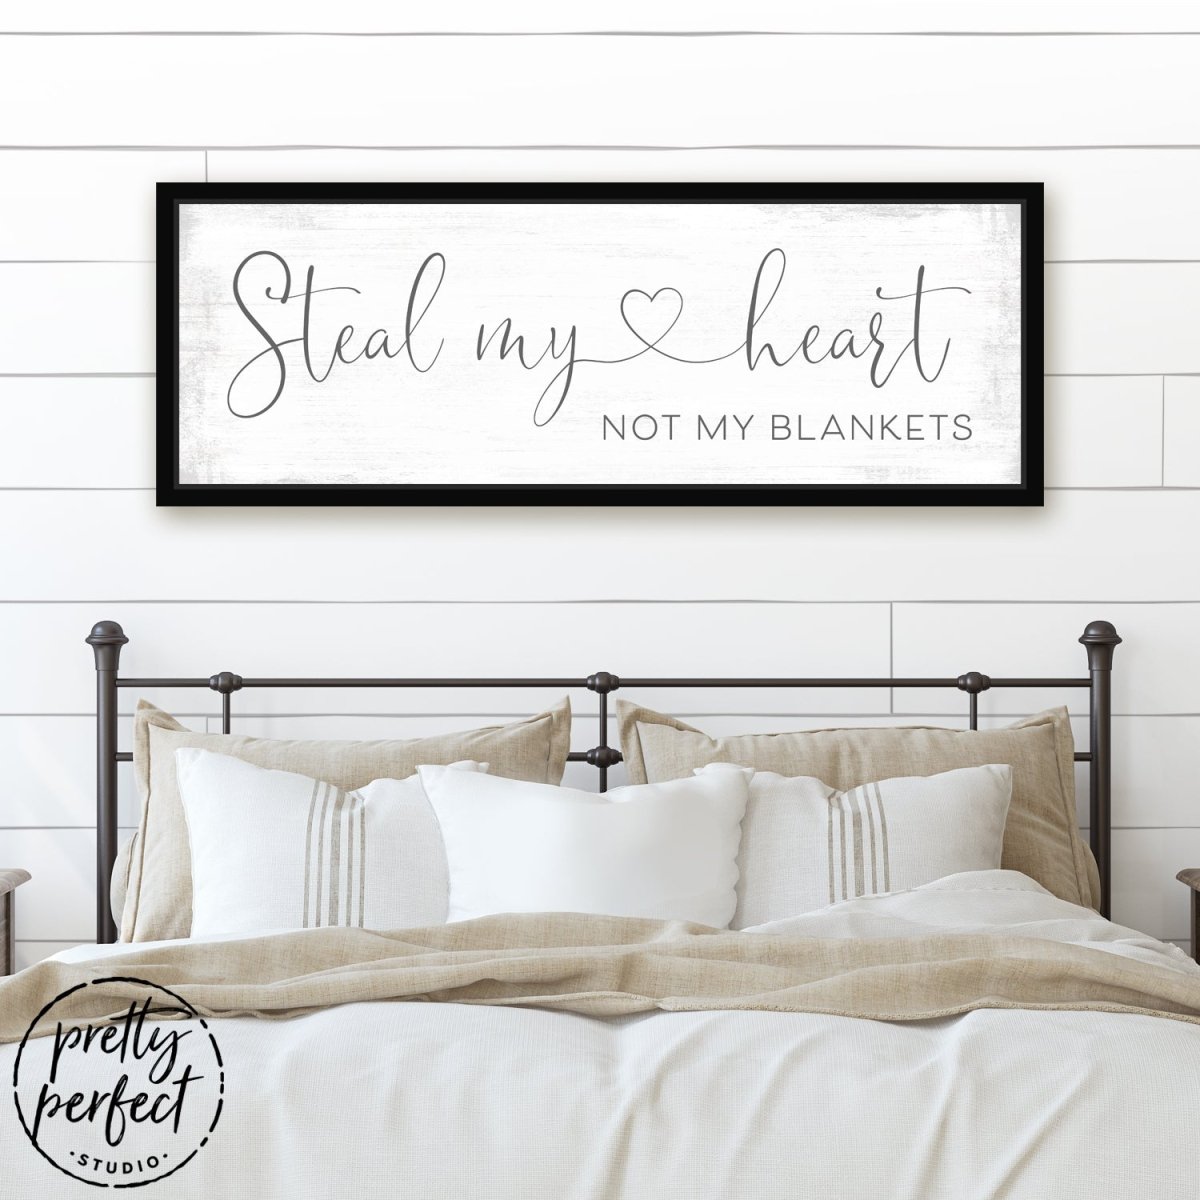 Steal My Heart Not My Blankets Sign in Bedroom - Pretty Perfect Studio